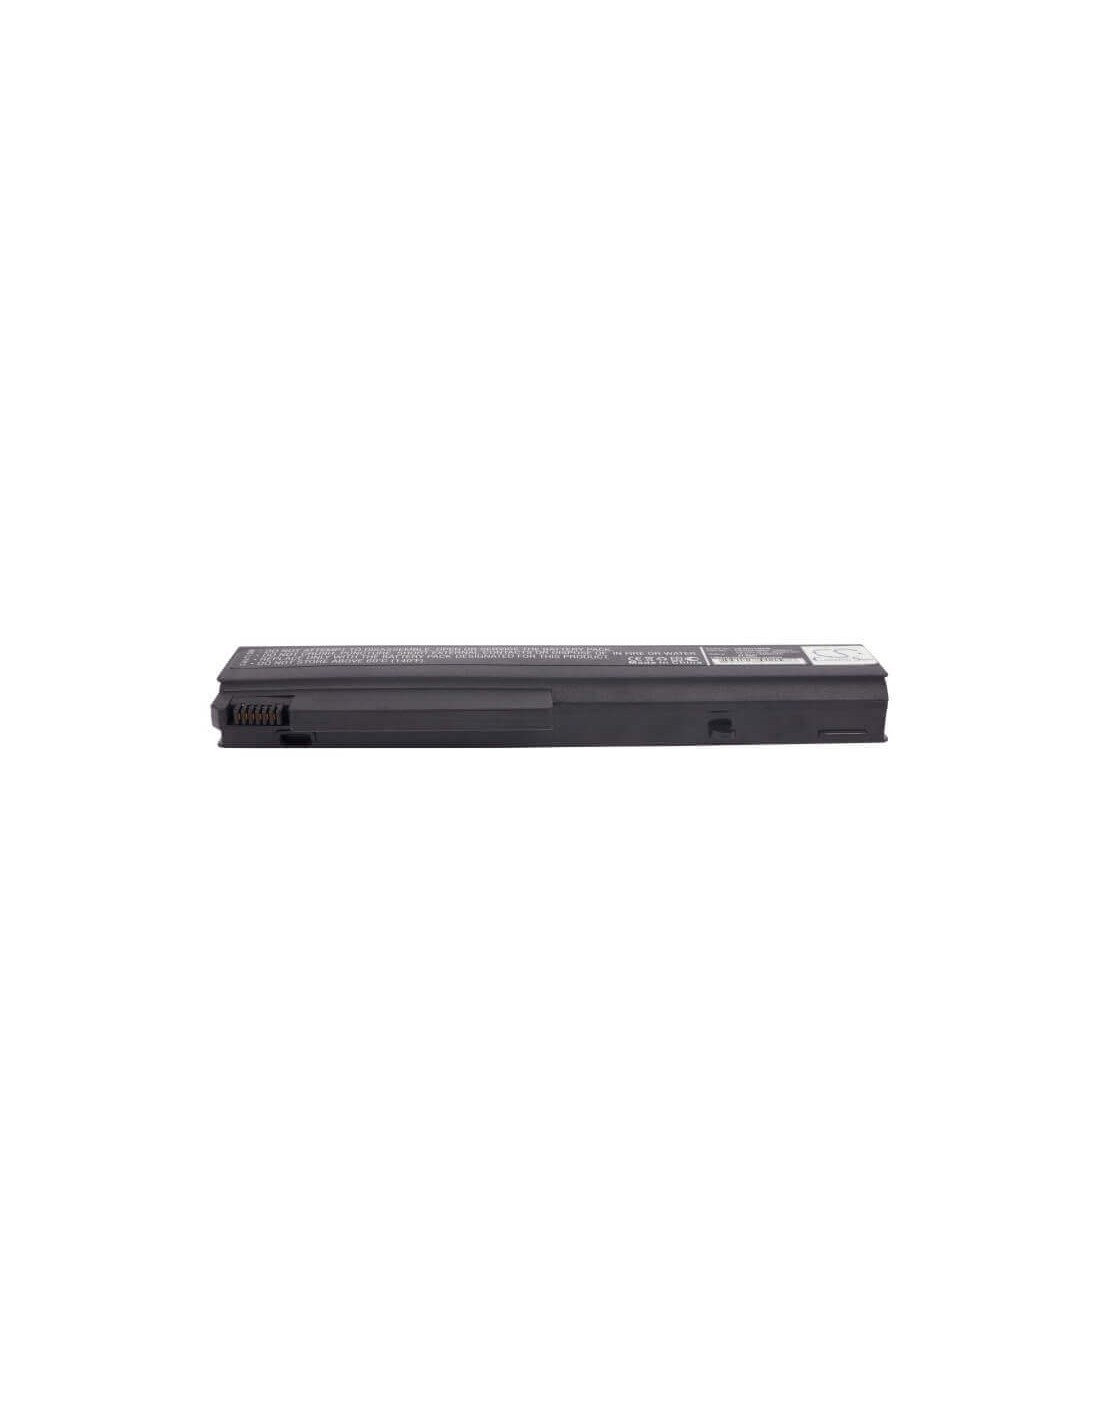 Black Battery for HP Business Notebook 6715b, Business Notebook NX6325, Business Notebook NX6110/CT 10.8V, 4400mAh - 47.52Wh